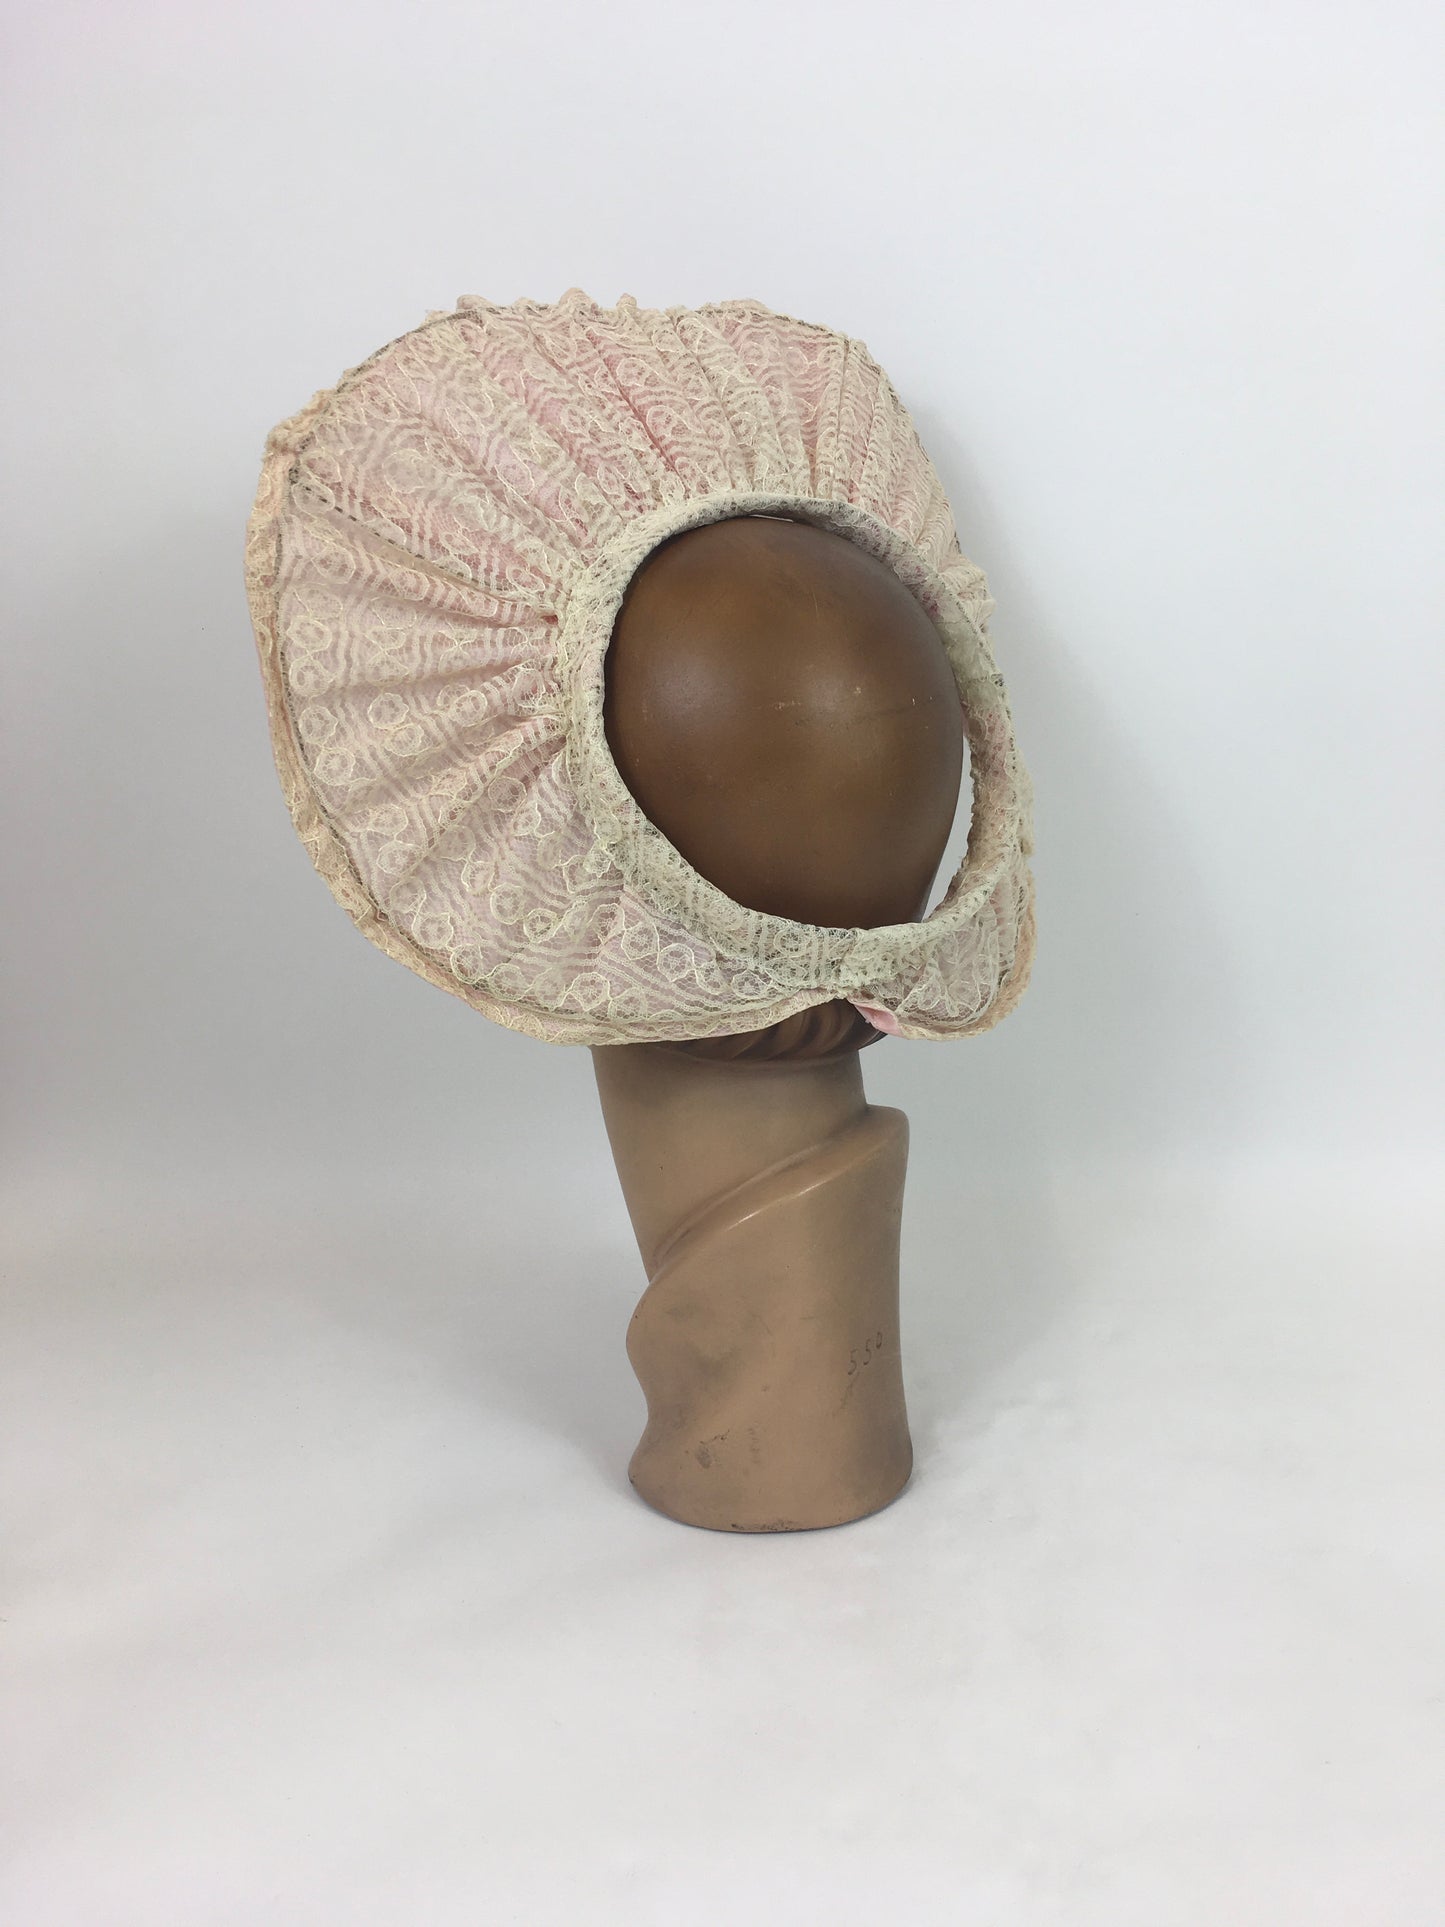 Original 1940's Open Crown Halo Hat - In Soft Rosebud Pink with Lace Overlay